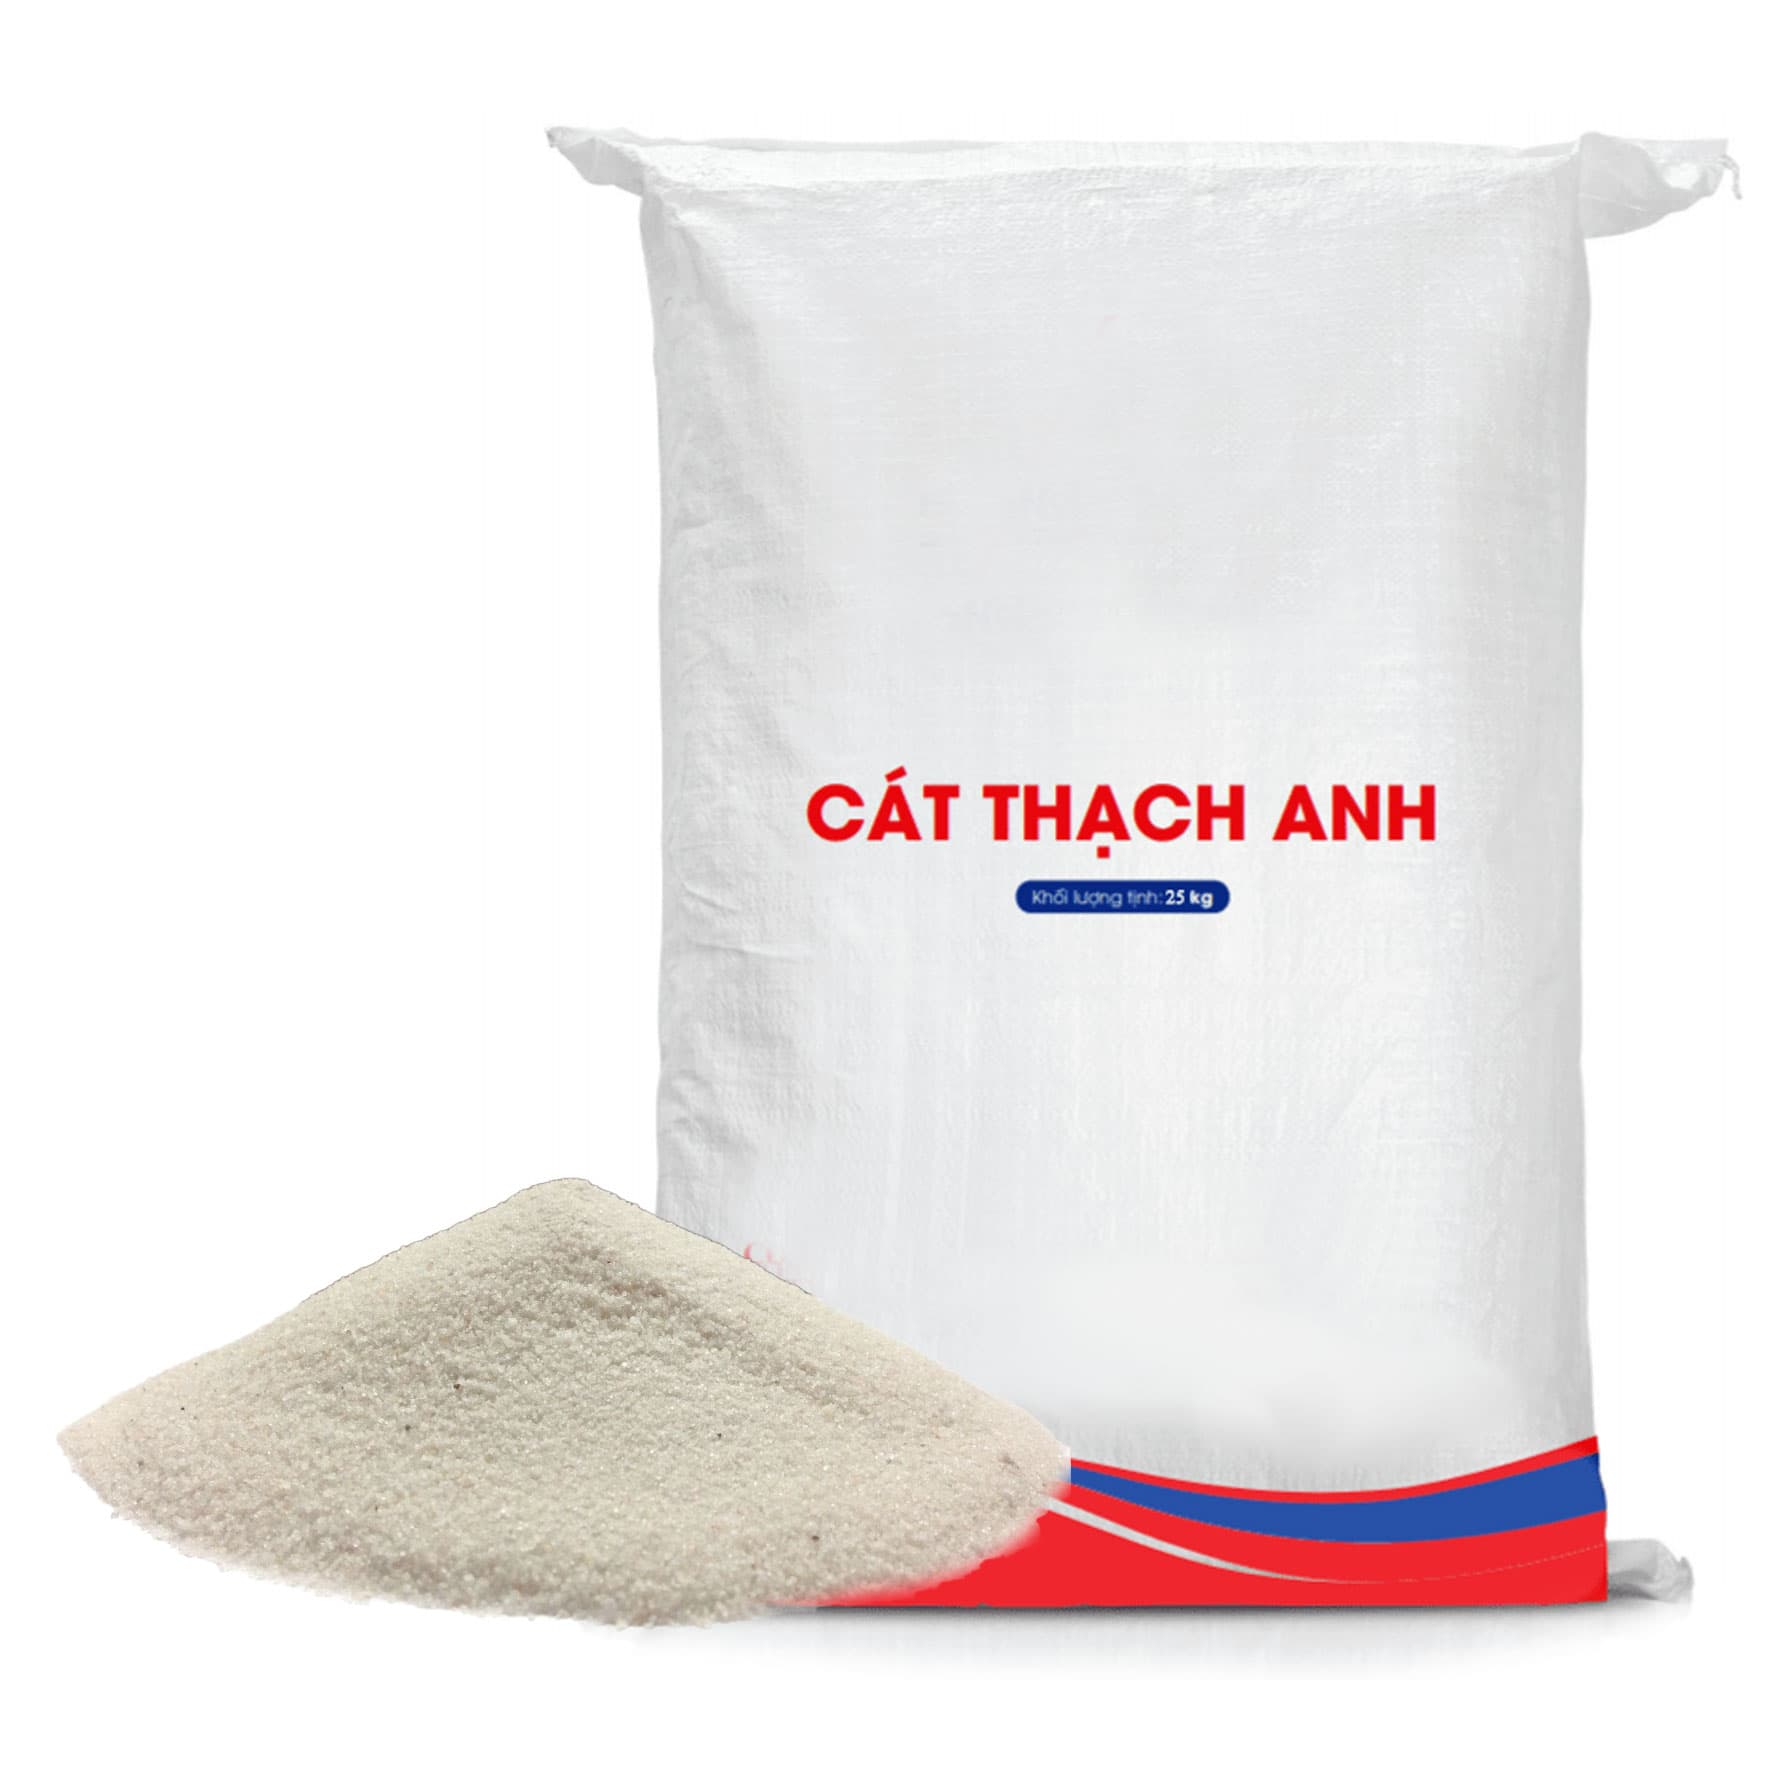 cat-thach-anh-bao-25kg